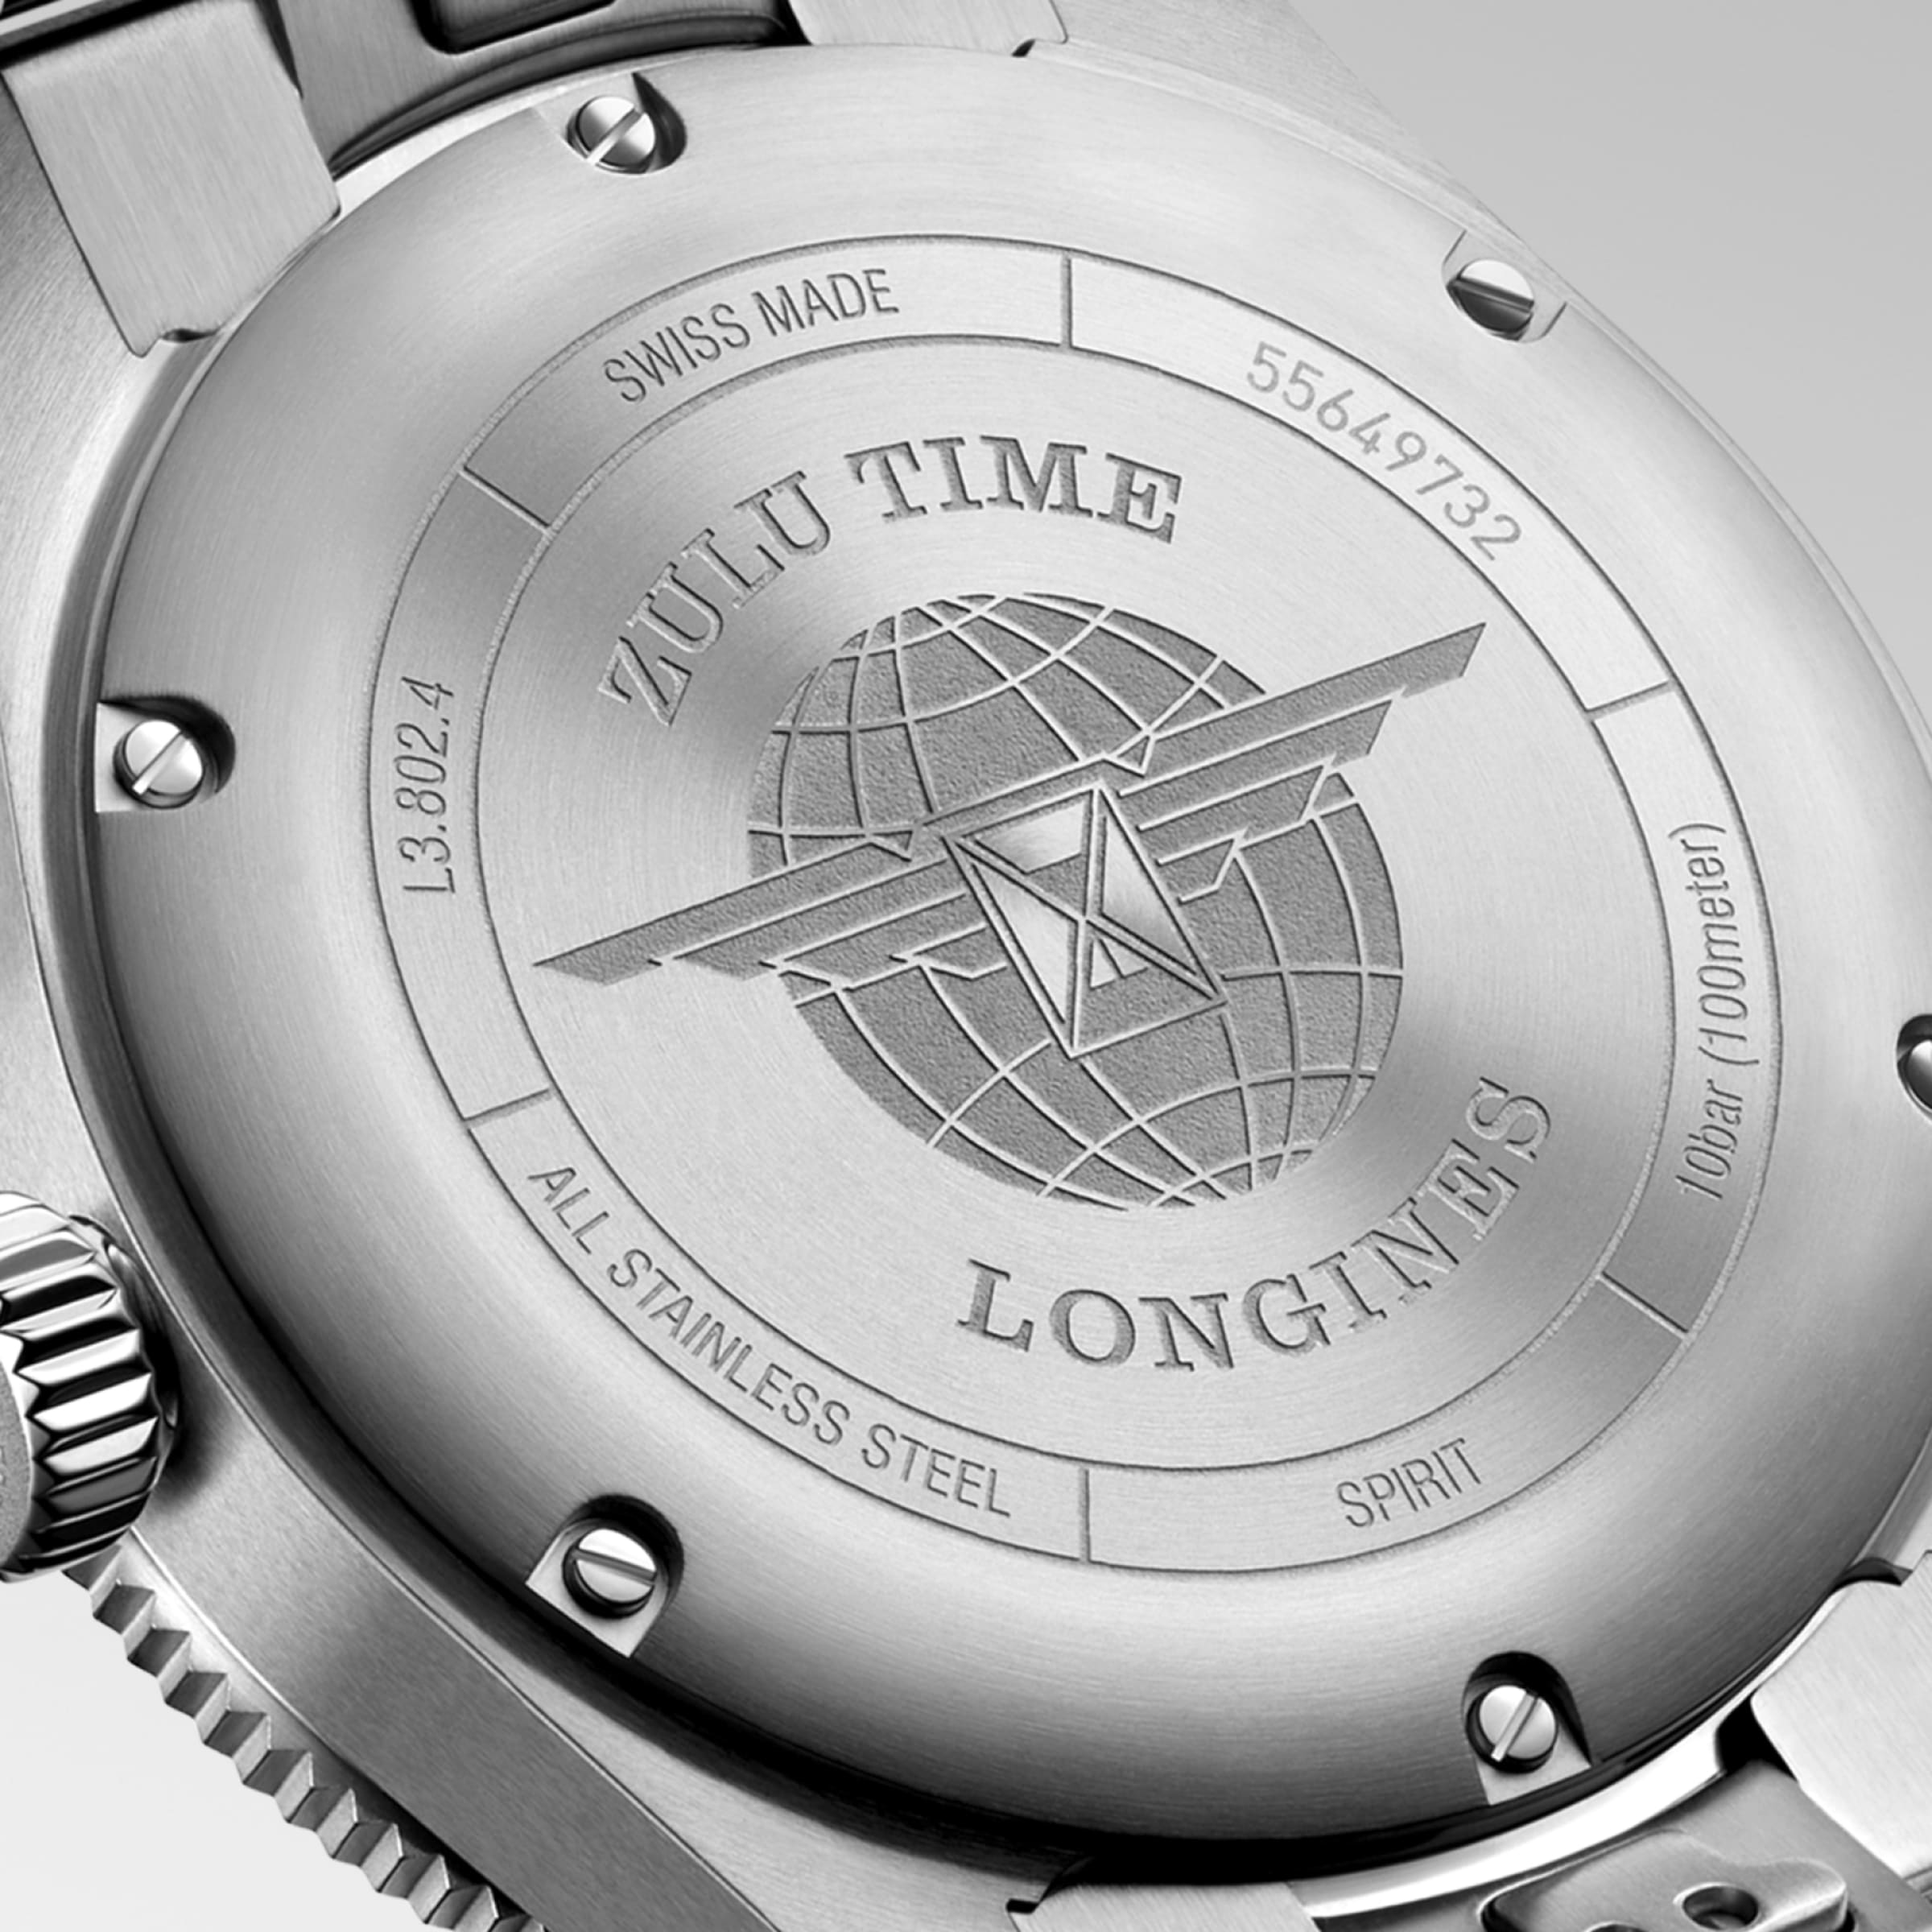 Longines SPIRIT Automatic Stainless steel and ceramic bezel Watch - L3.802.4.63.6